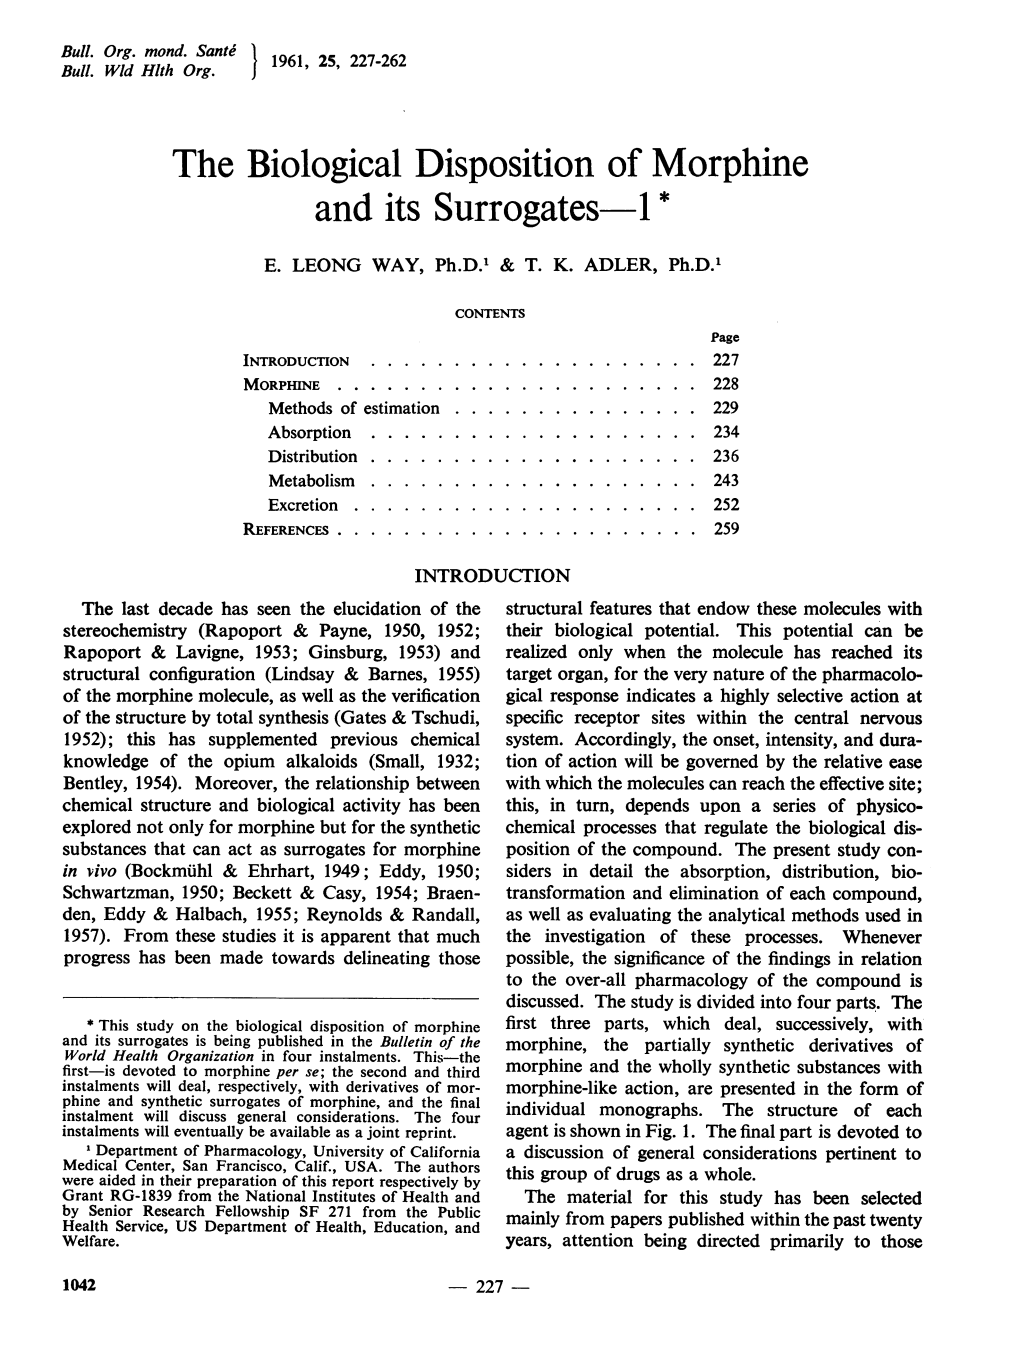 The Biological Disposition of Morphine and Its Surrogates 1 *